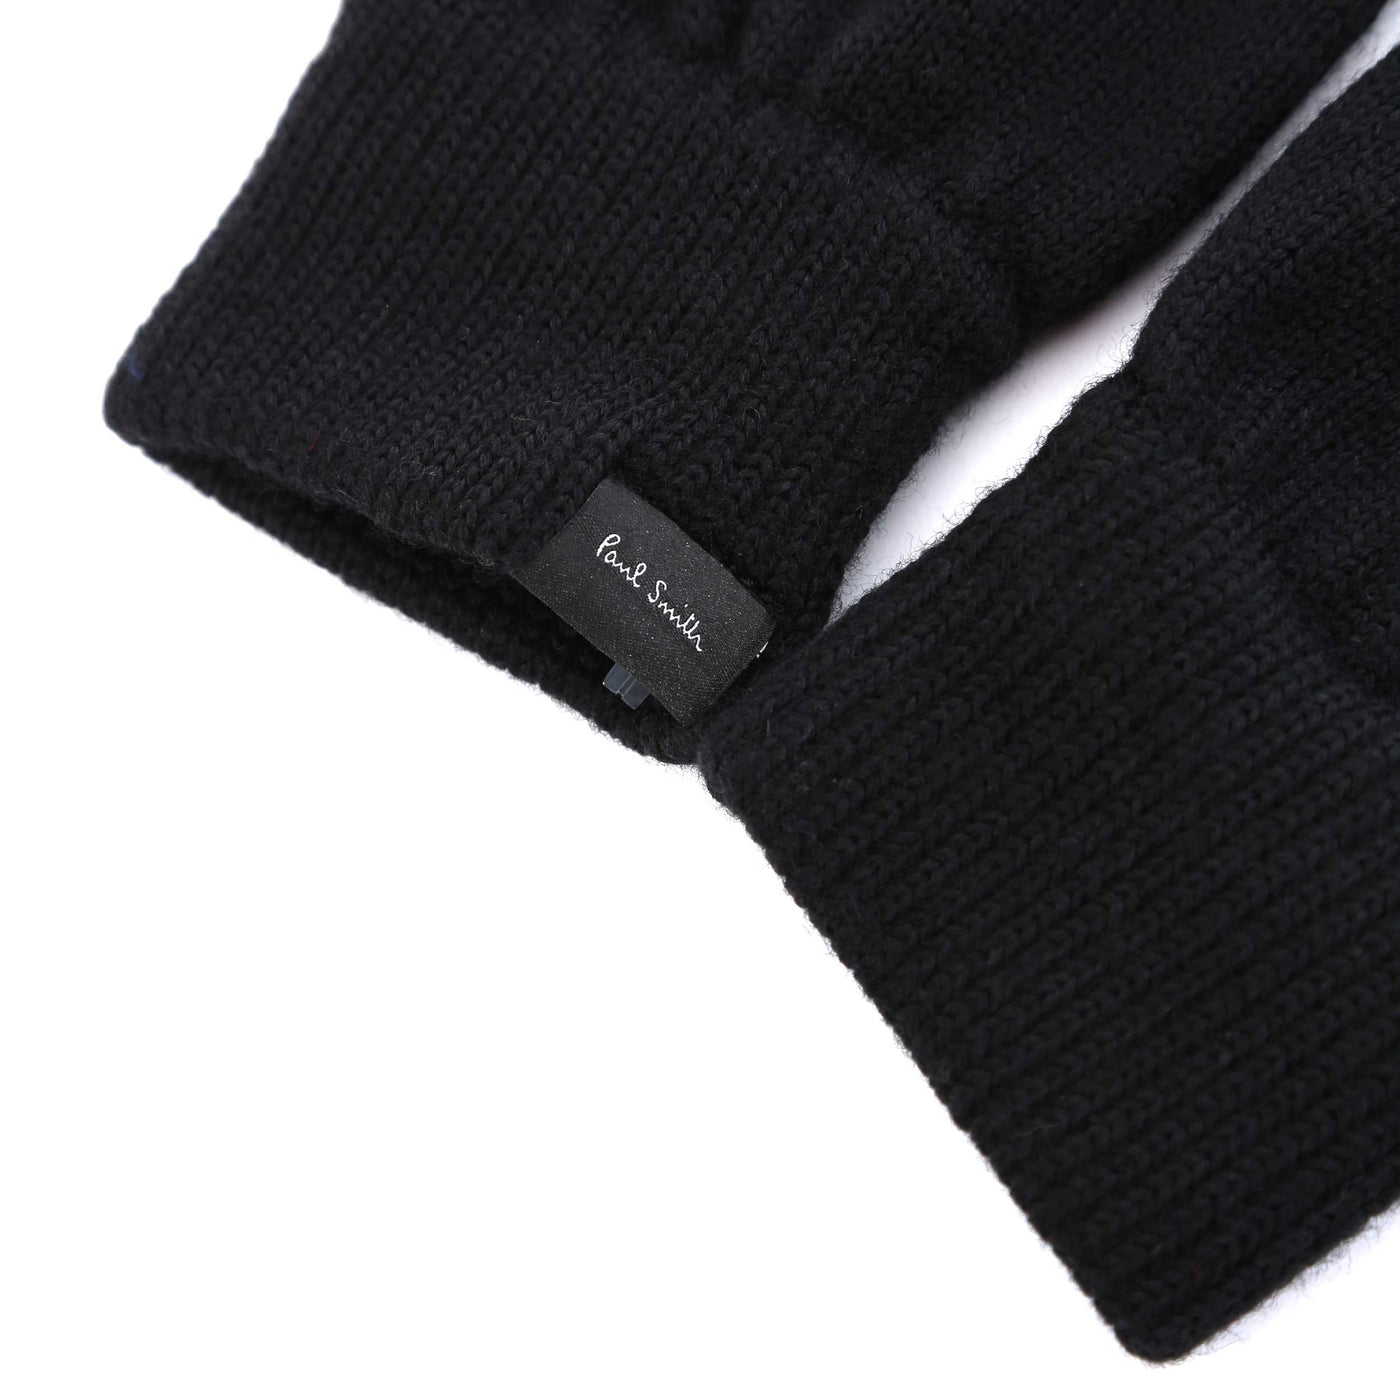 Paul Smith Hat, Glove & Scarf Gift Set in Black